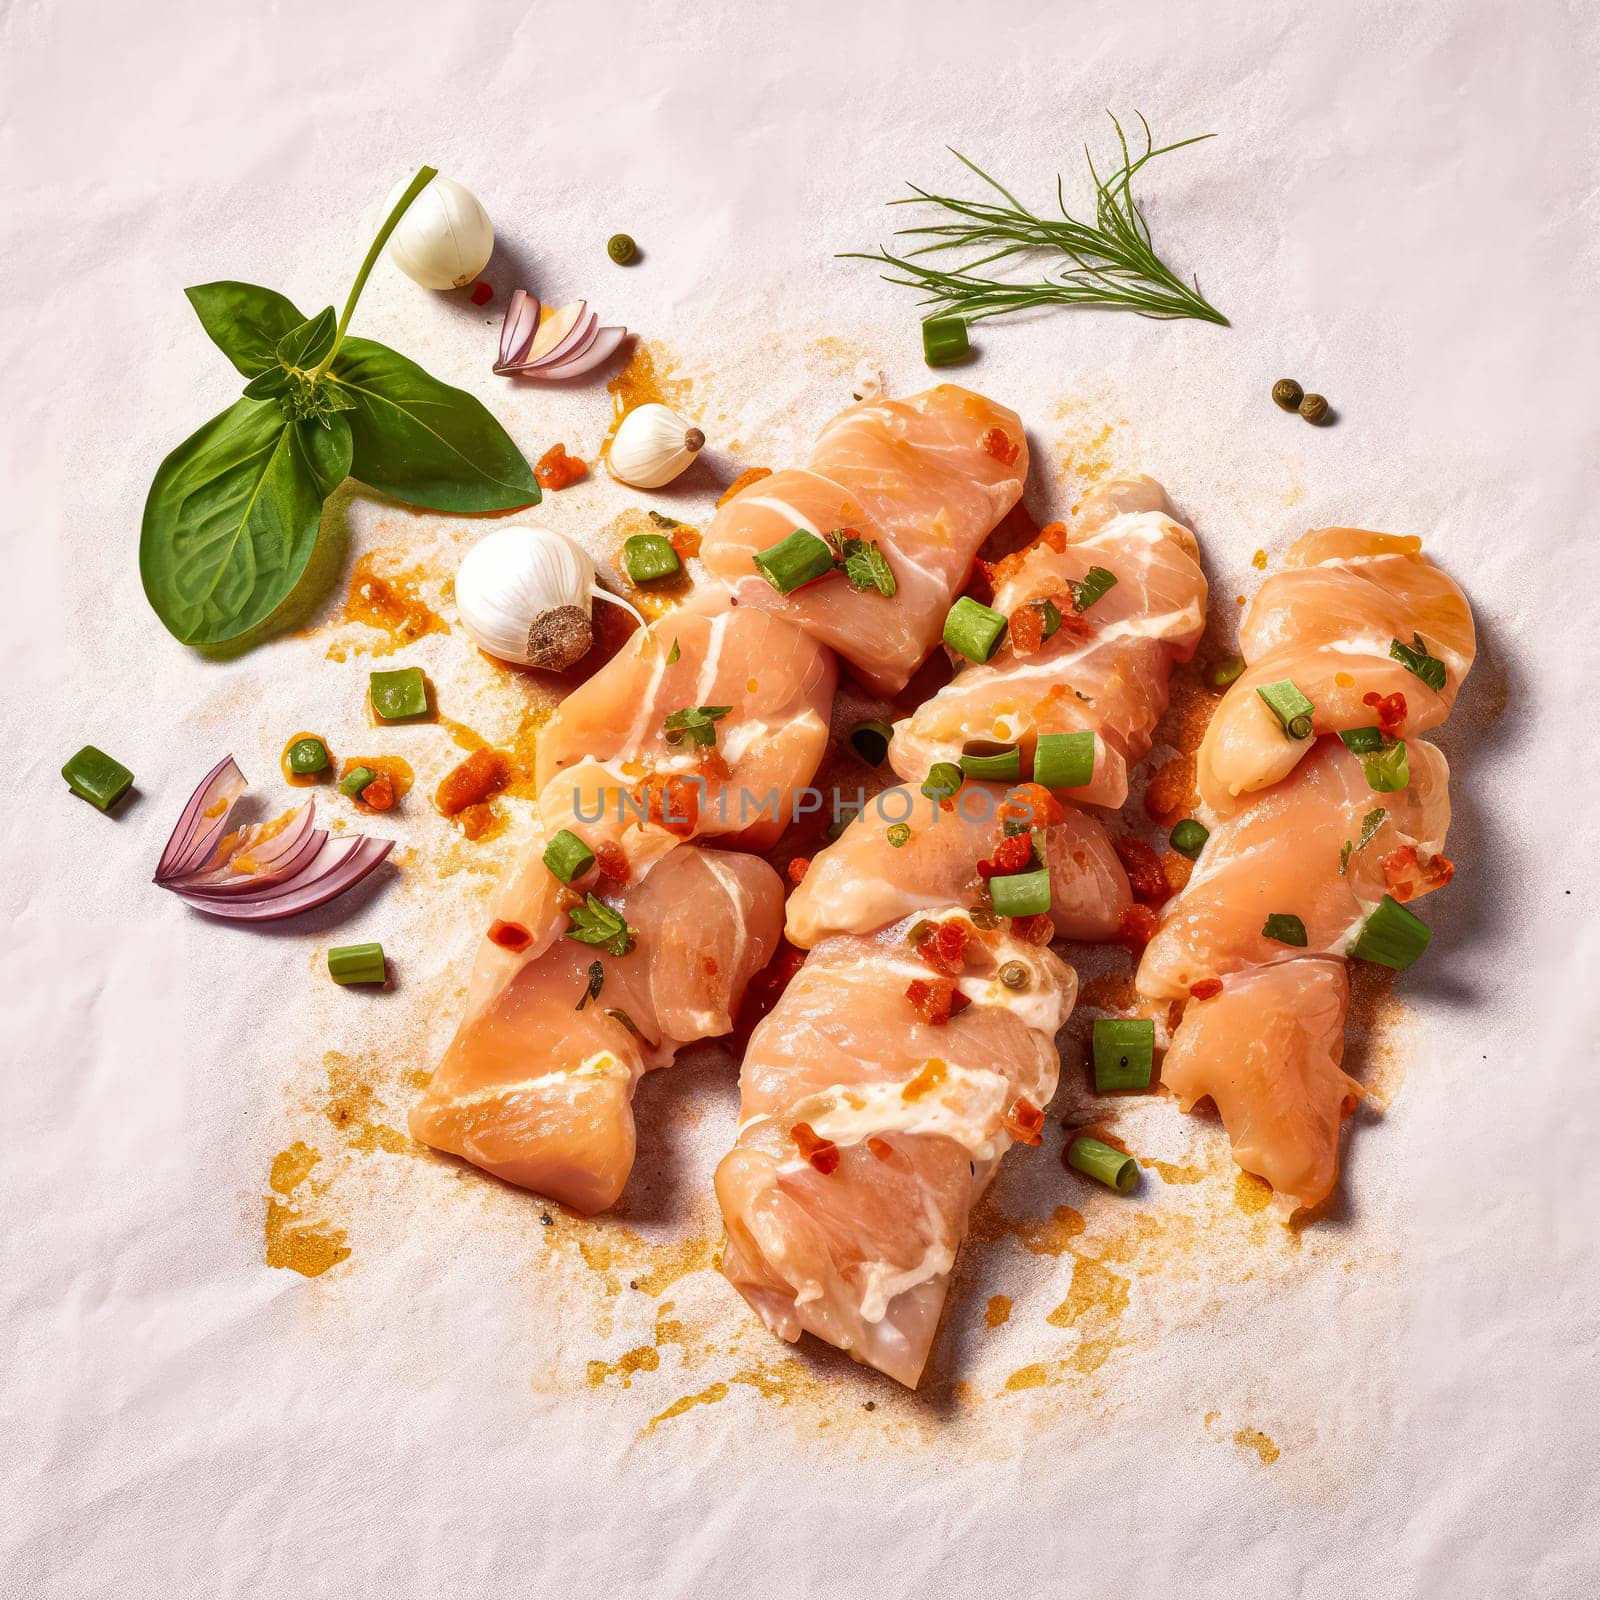 Savor the anticipation, Raw pork slices on skewers, expertly seasoned and ready for culinary mastery. White isolated background for a striking visual appeal